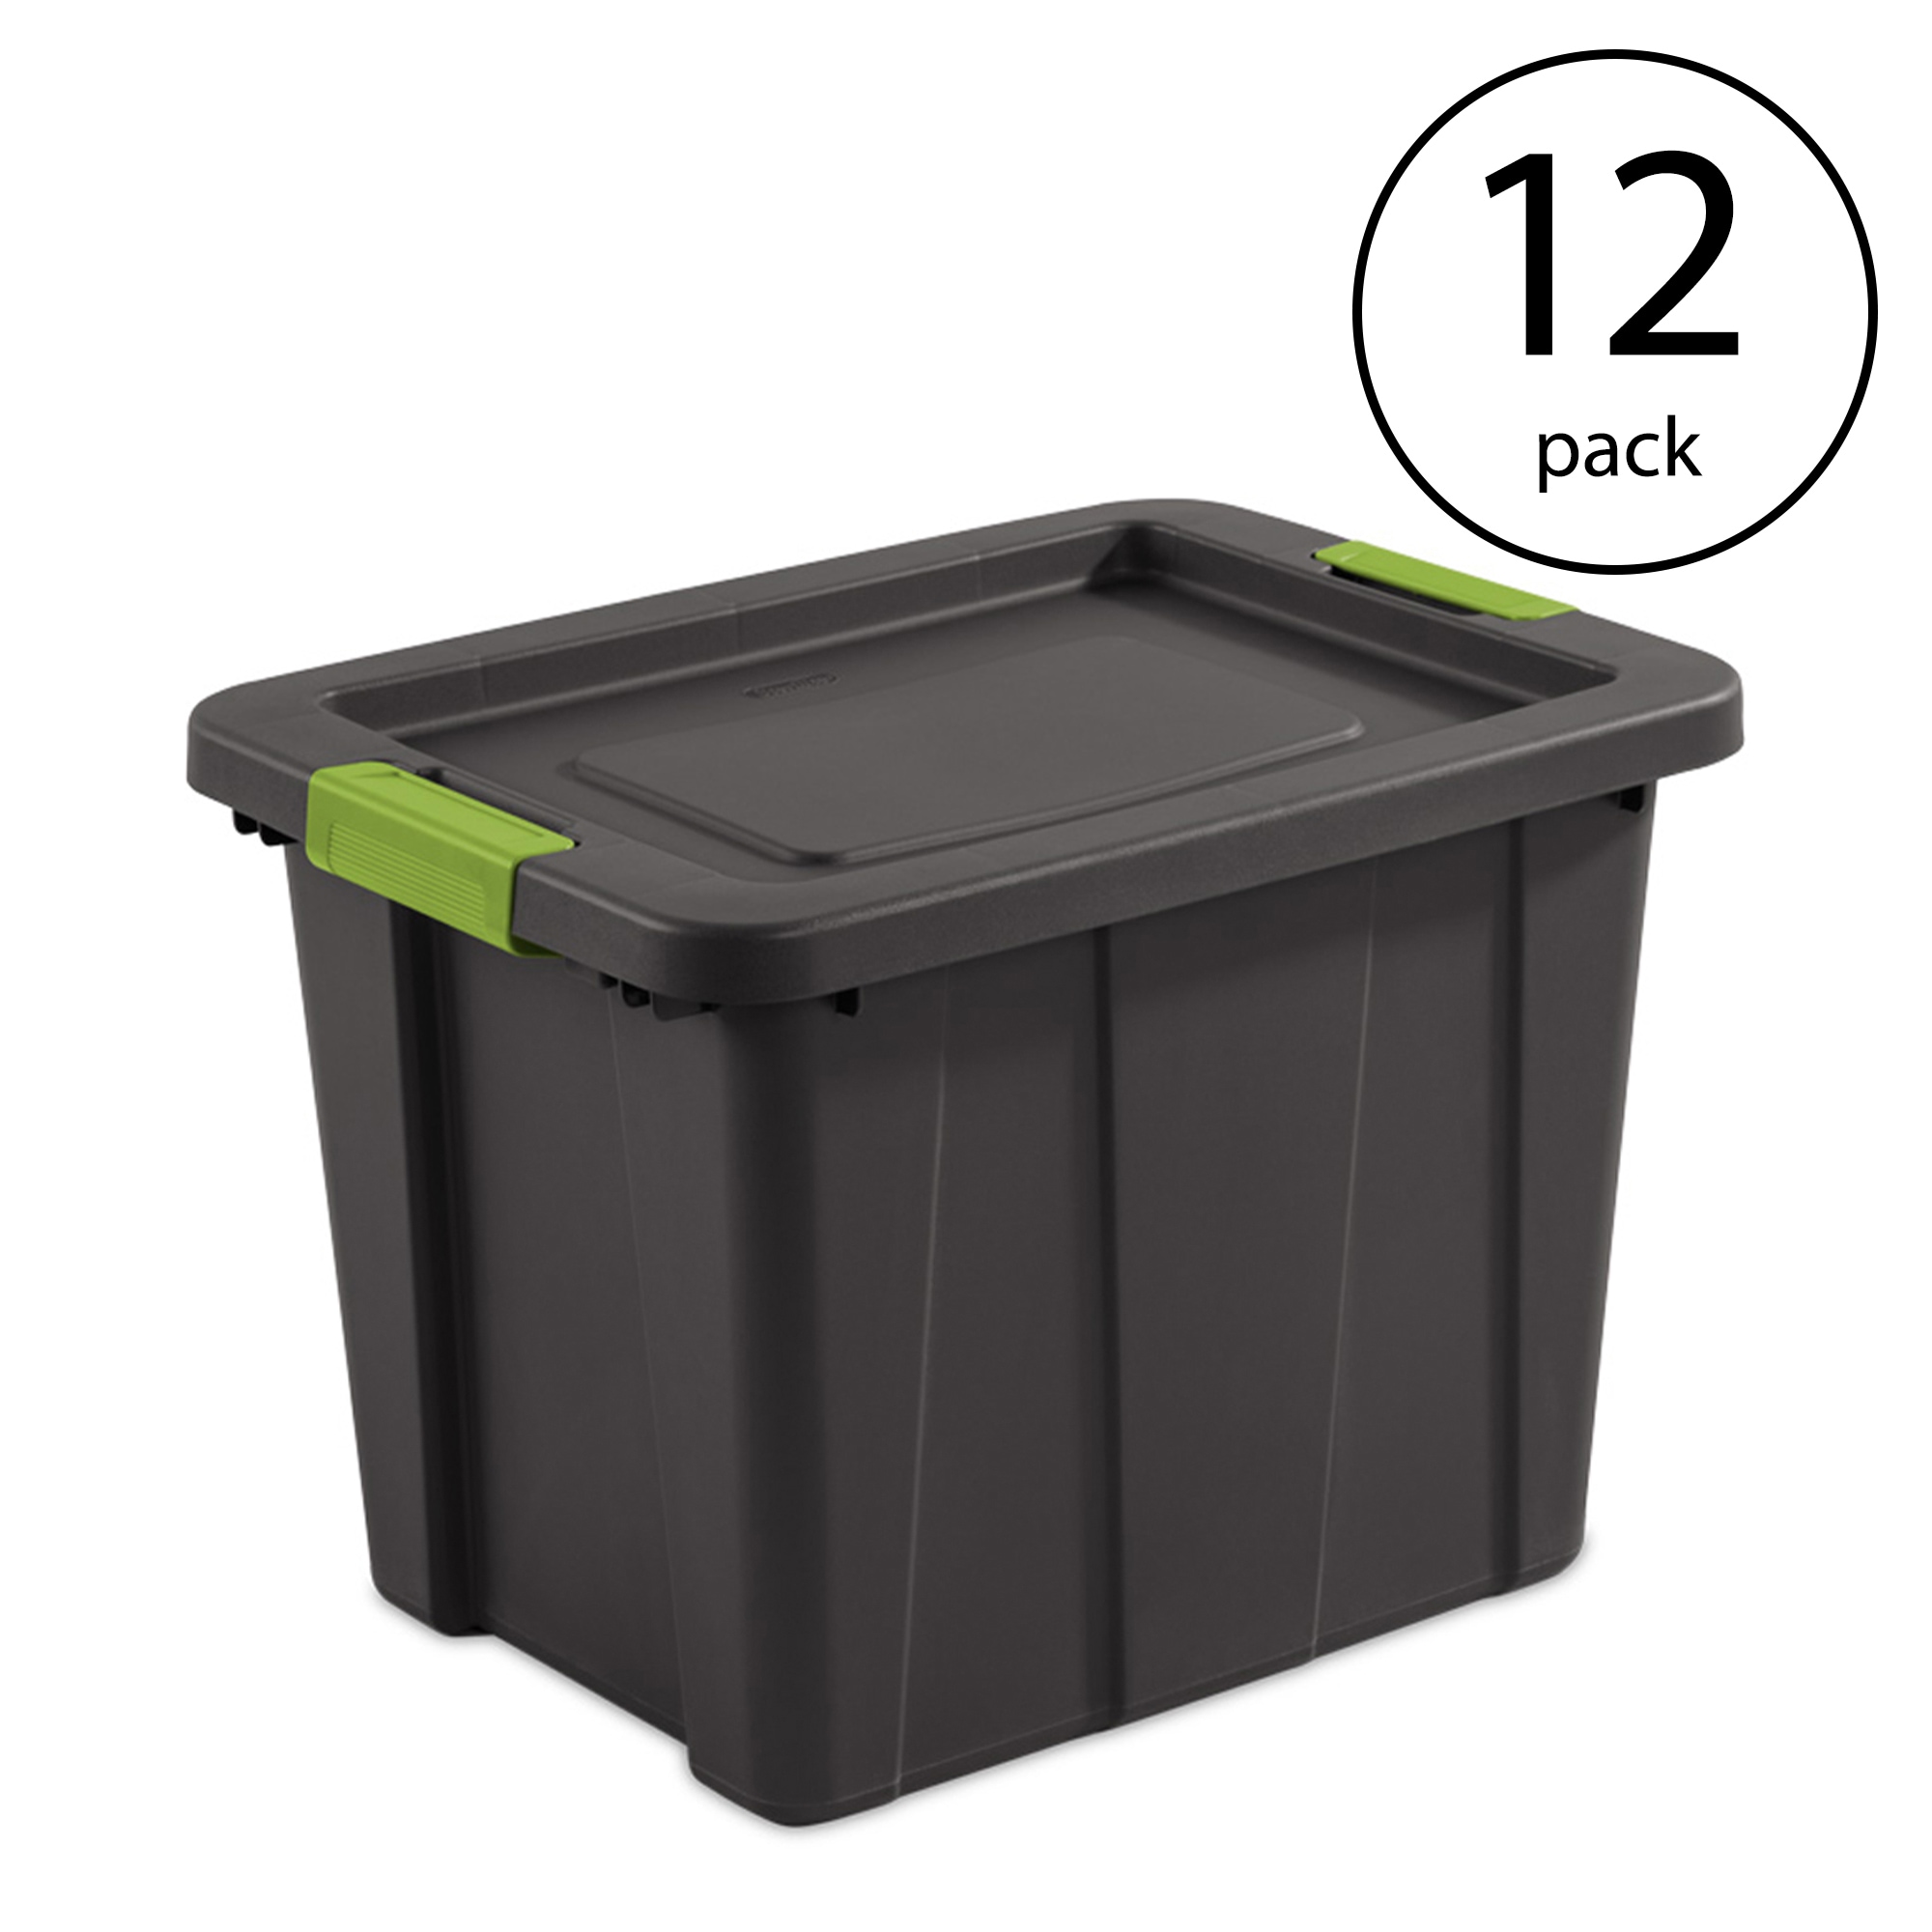 Tuff1 18 gal. Plastic Storage Tote Container Bin with Lid (24-Pack)